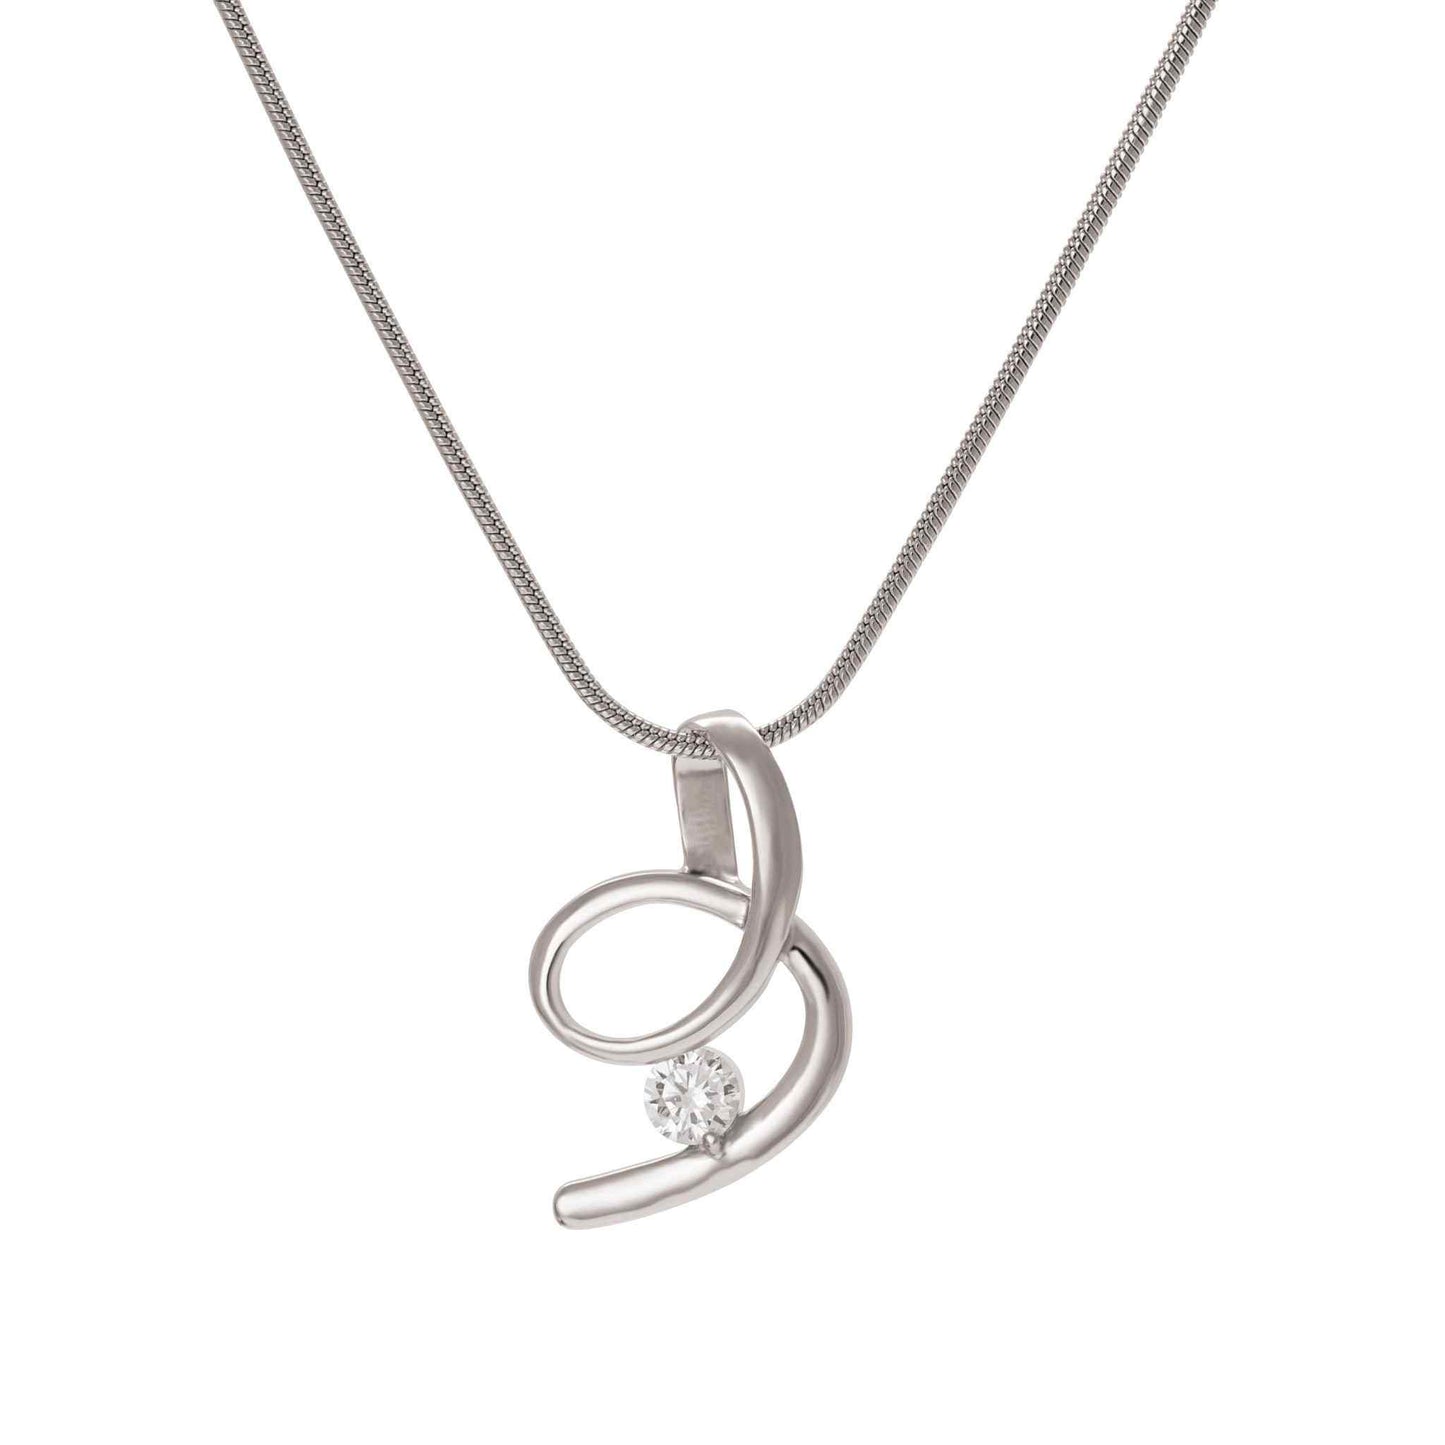 A simulated diamond swirl snake chain necklace displayed on a neutral white background.